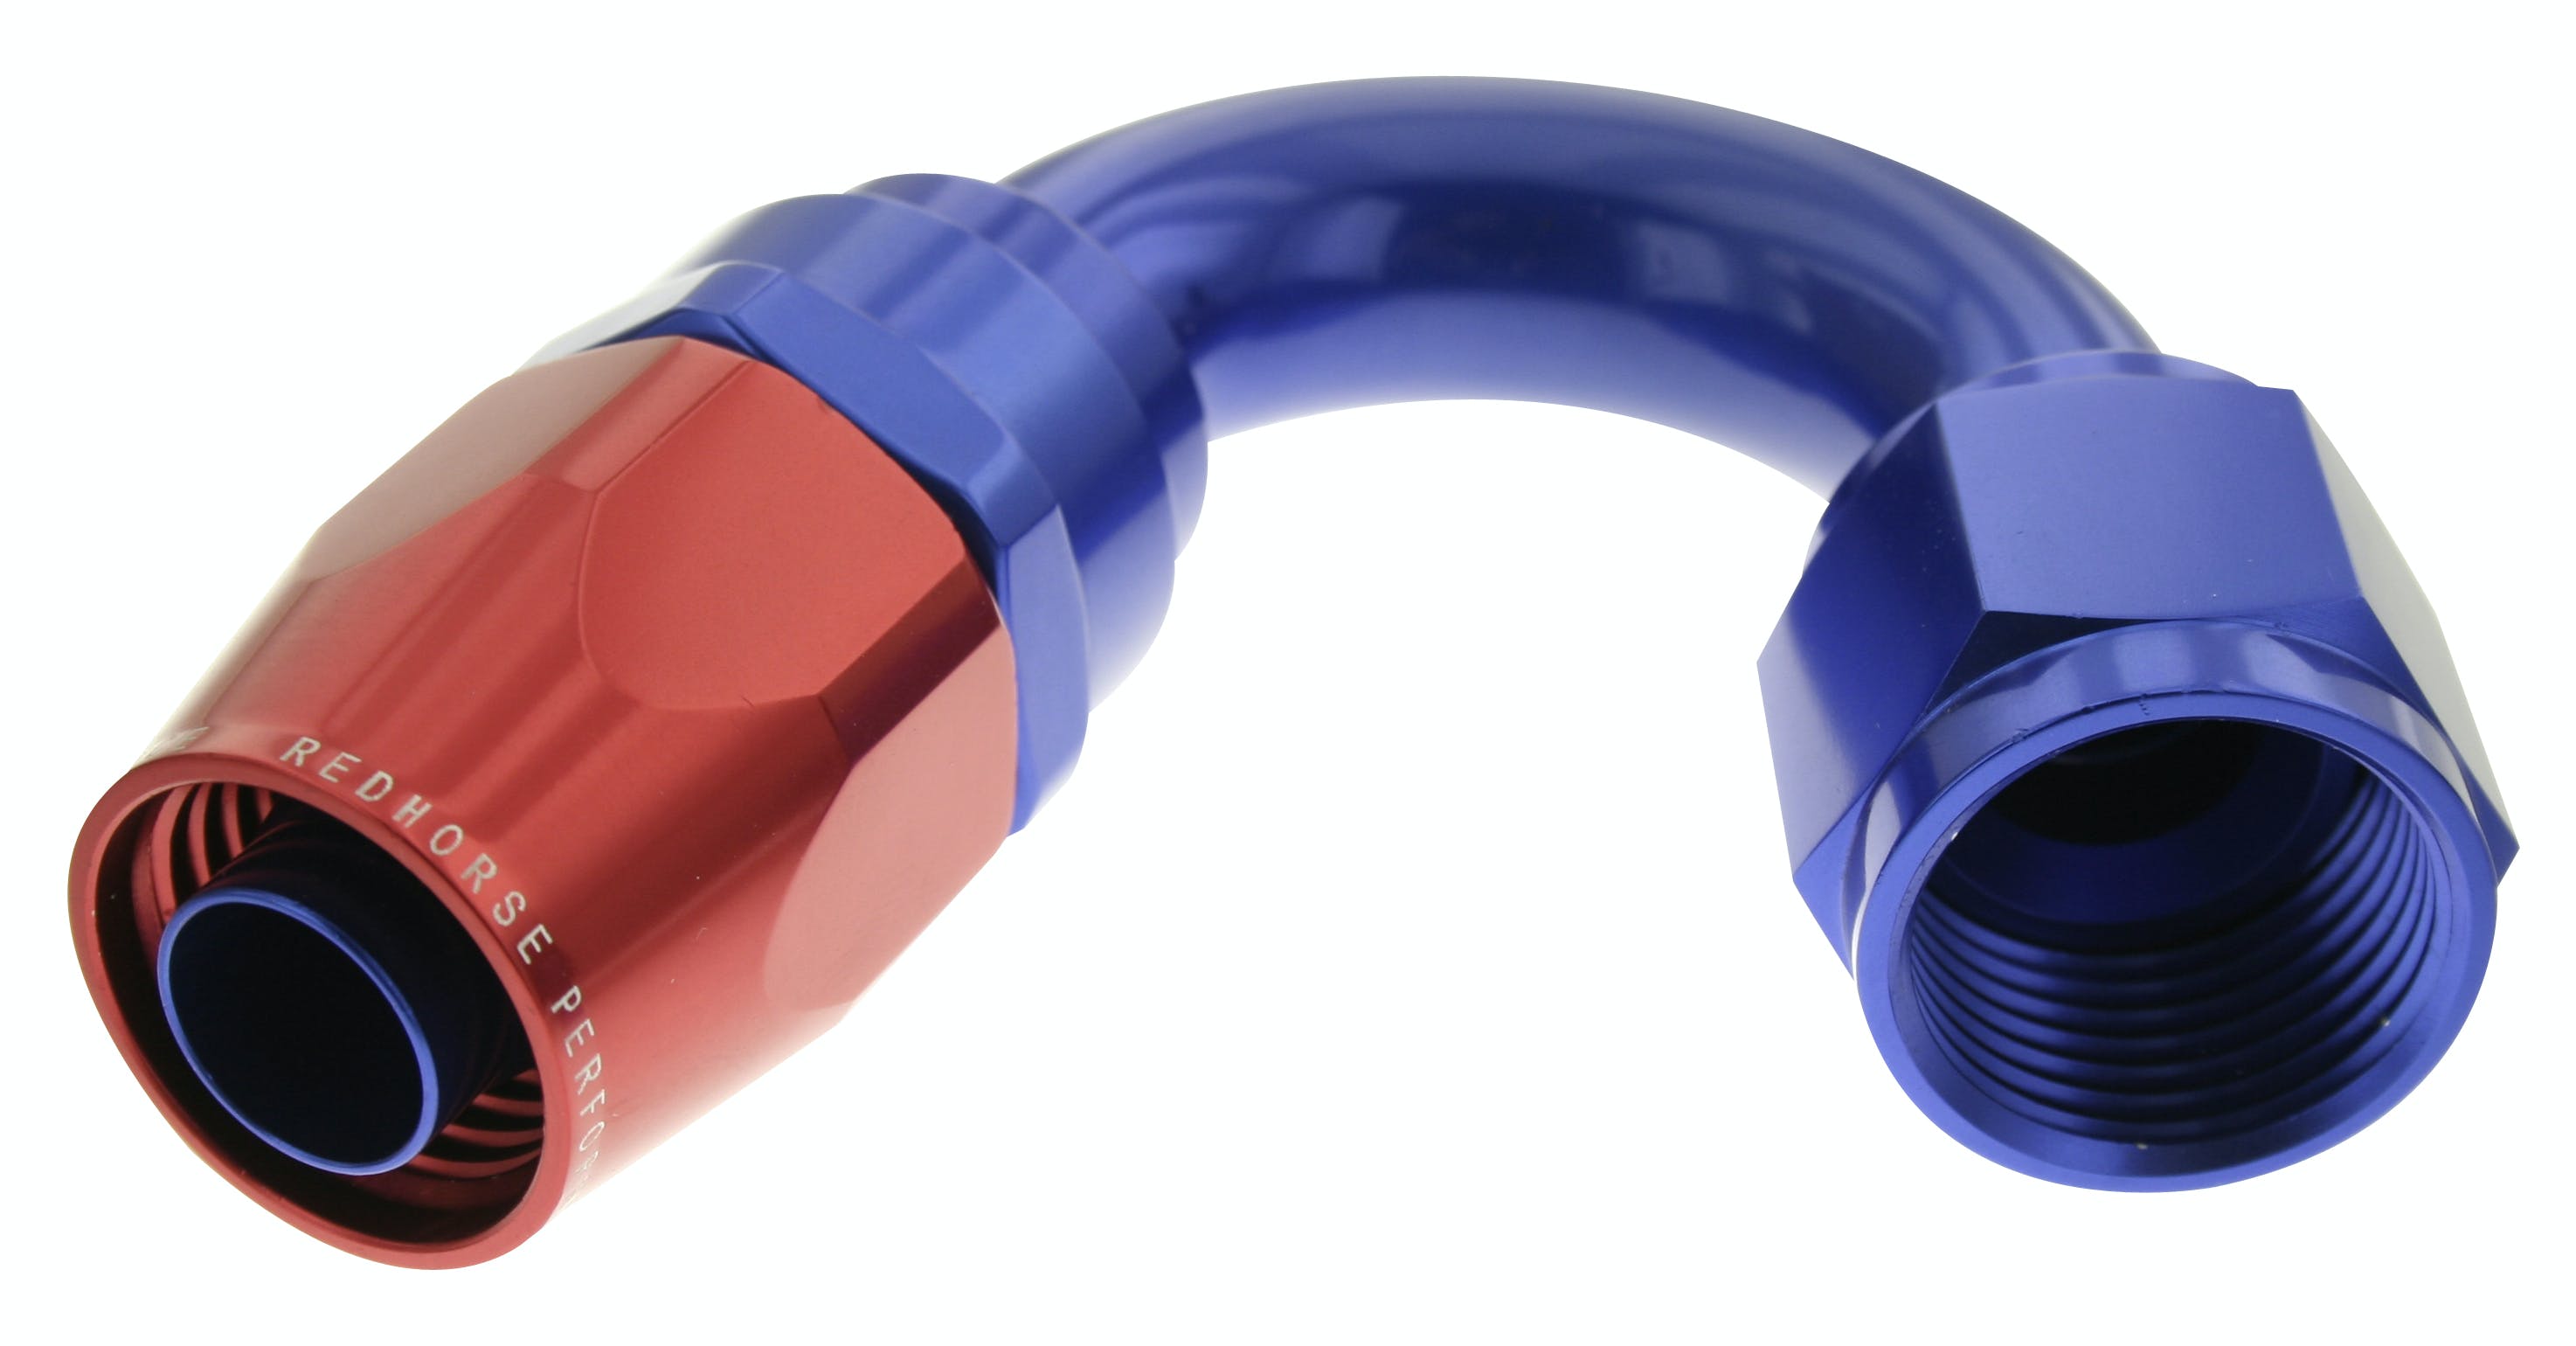 Redhorse Performance 1150-10-1 -10 150 degree Female Aluminum Hose End - red and blue